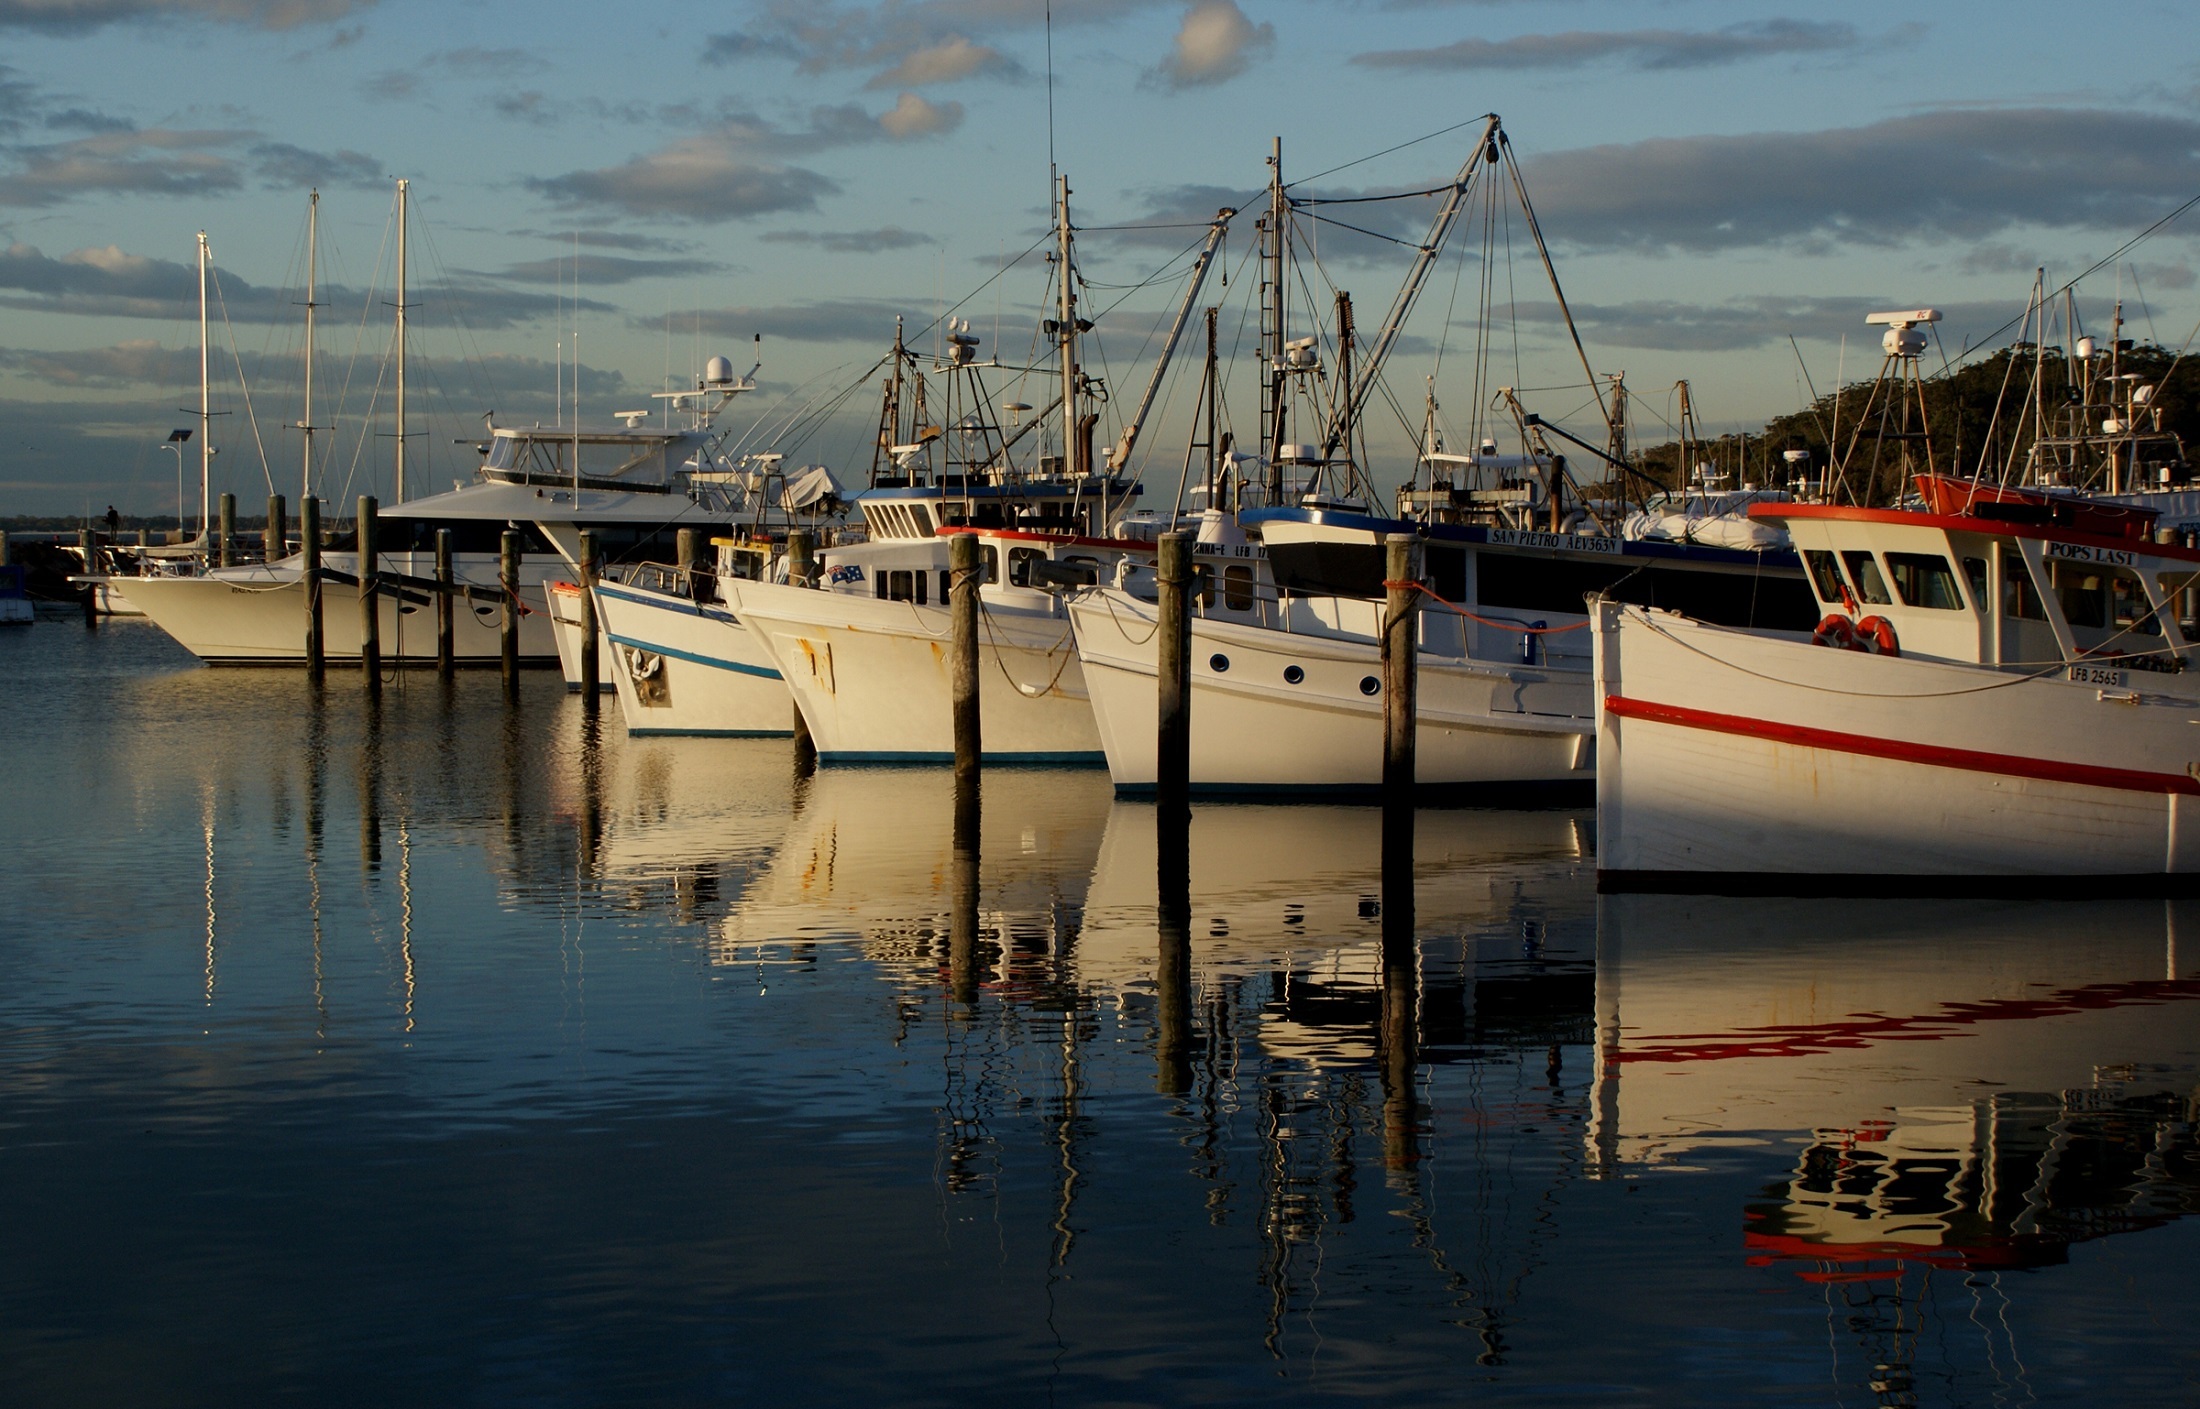 Boats on the port photo